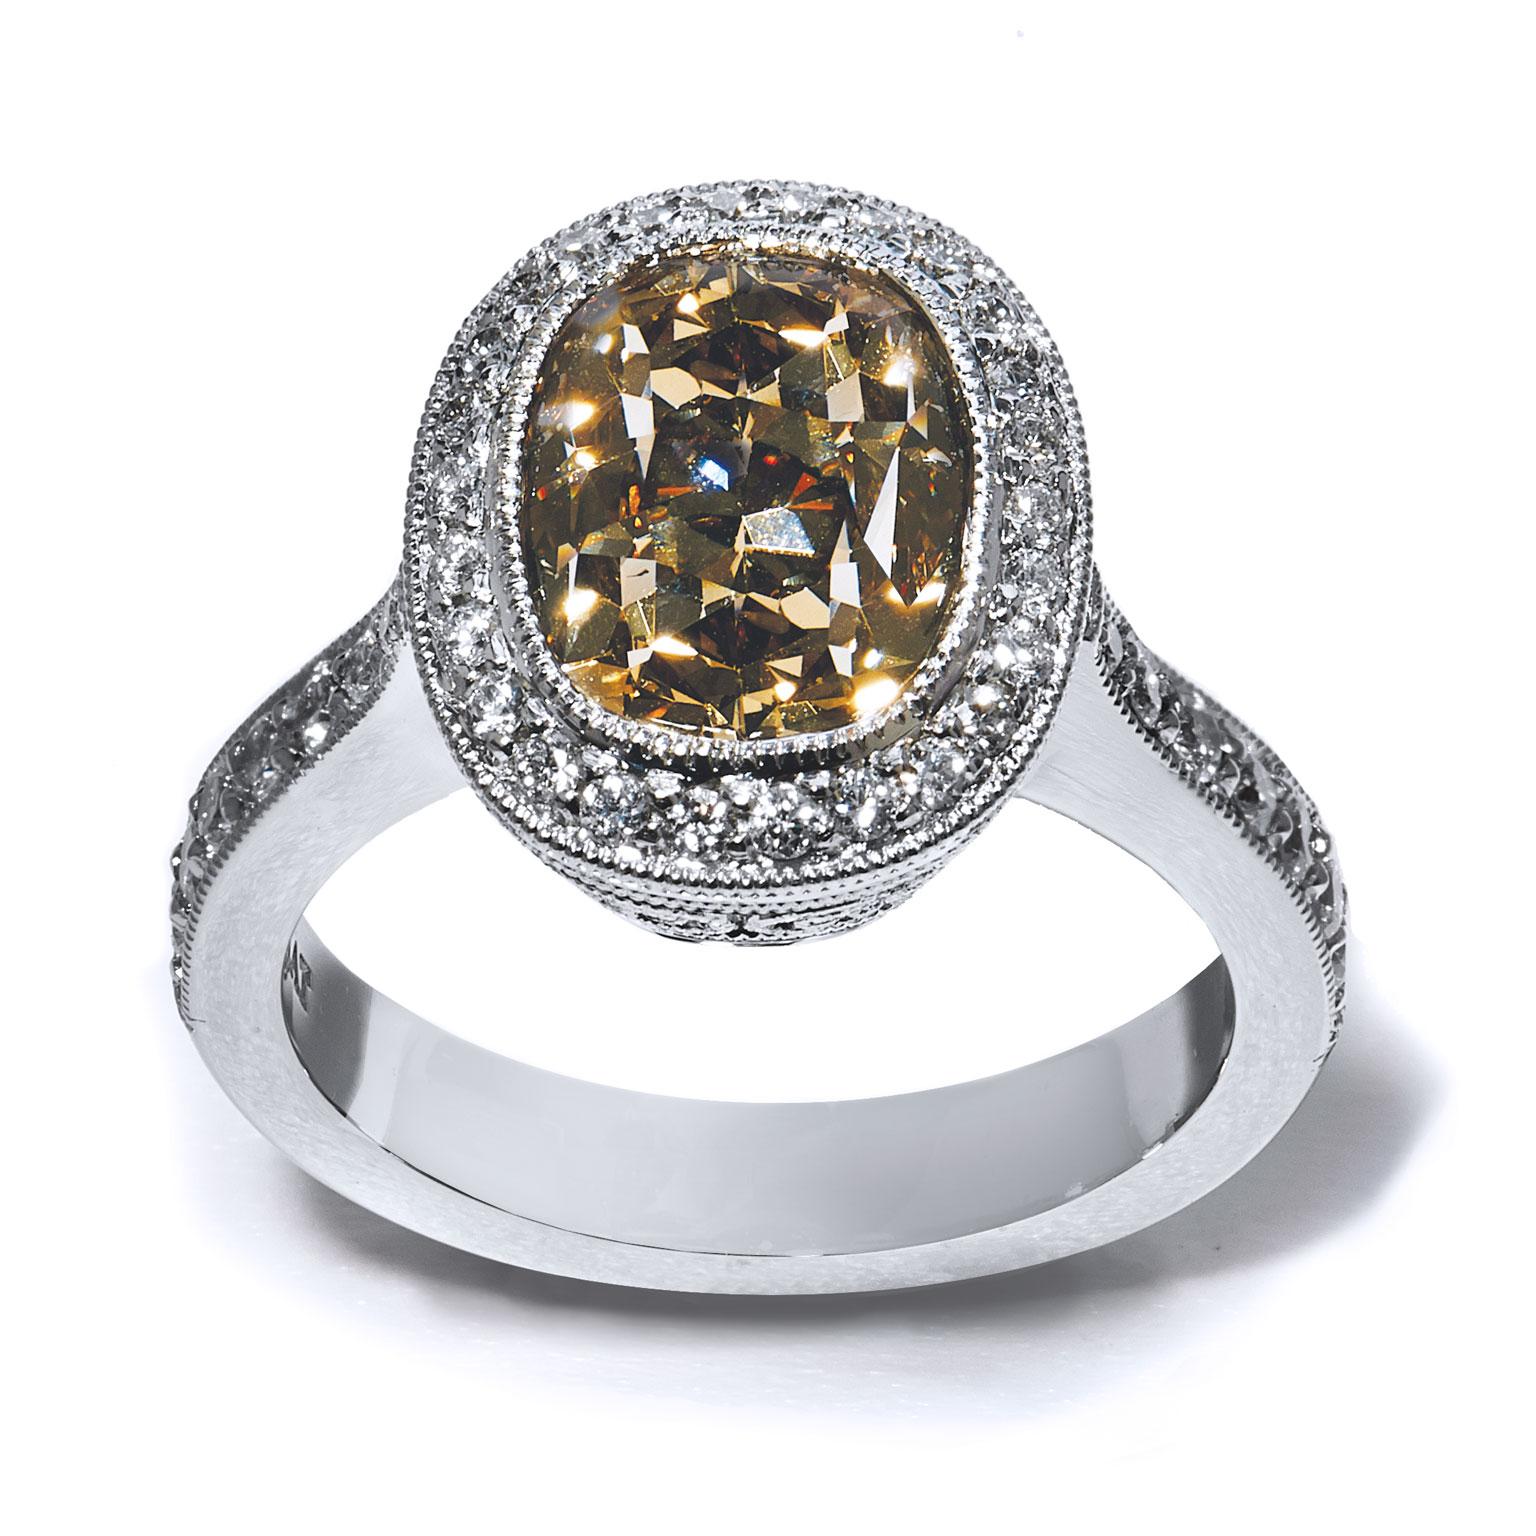 Exquisite Fancy Yellow Brown Diamond Platinum Engagement Ring with a 4.03ct Fancy Yellow Brown Diamond center. Pave set diamonds dance around the stone and down the shank. Exquisitely crafted by hand, this is an elegant piece from the H&H